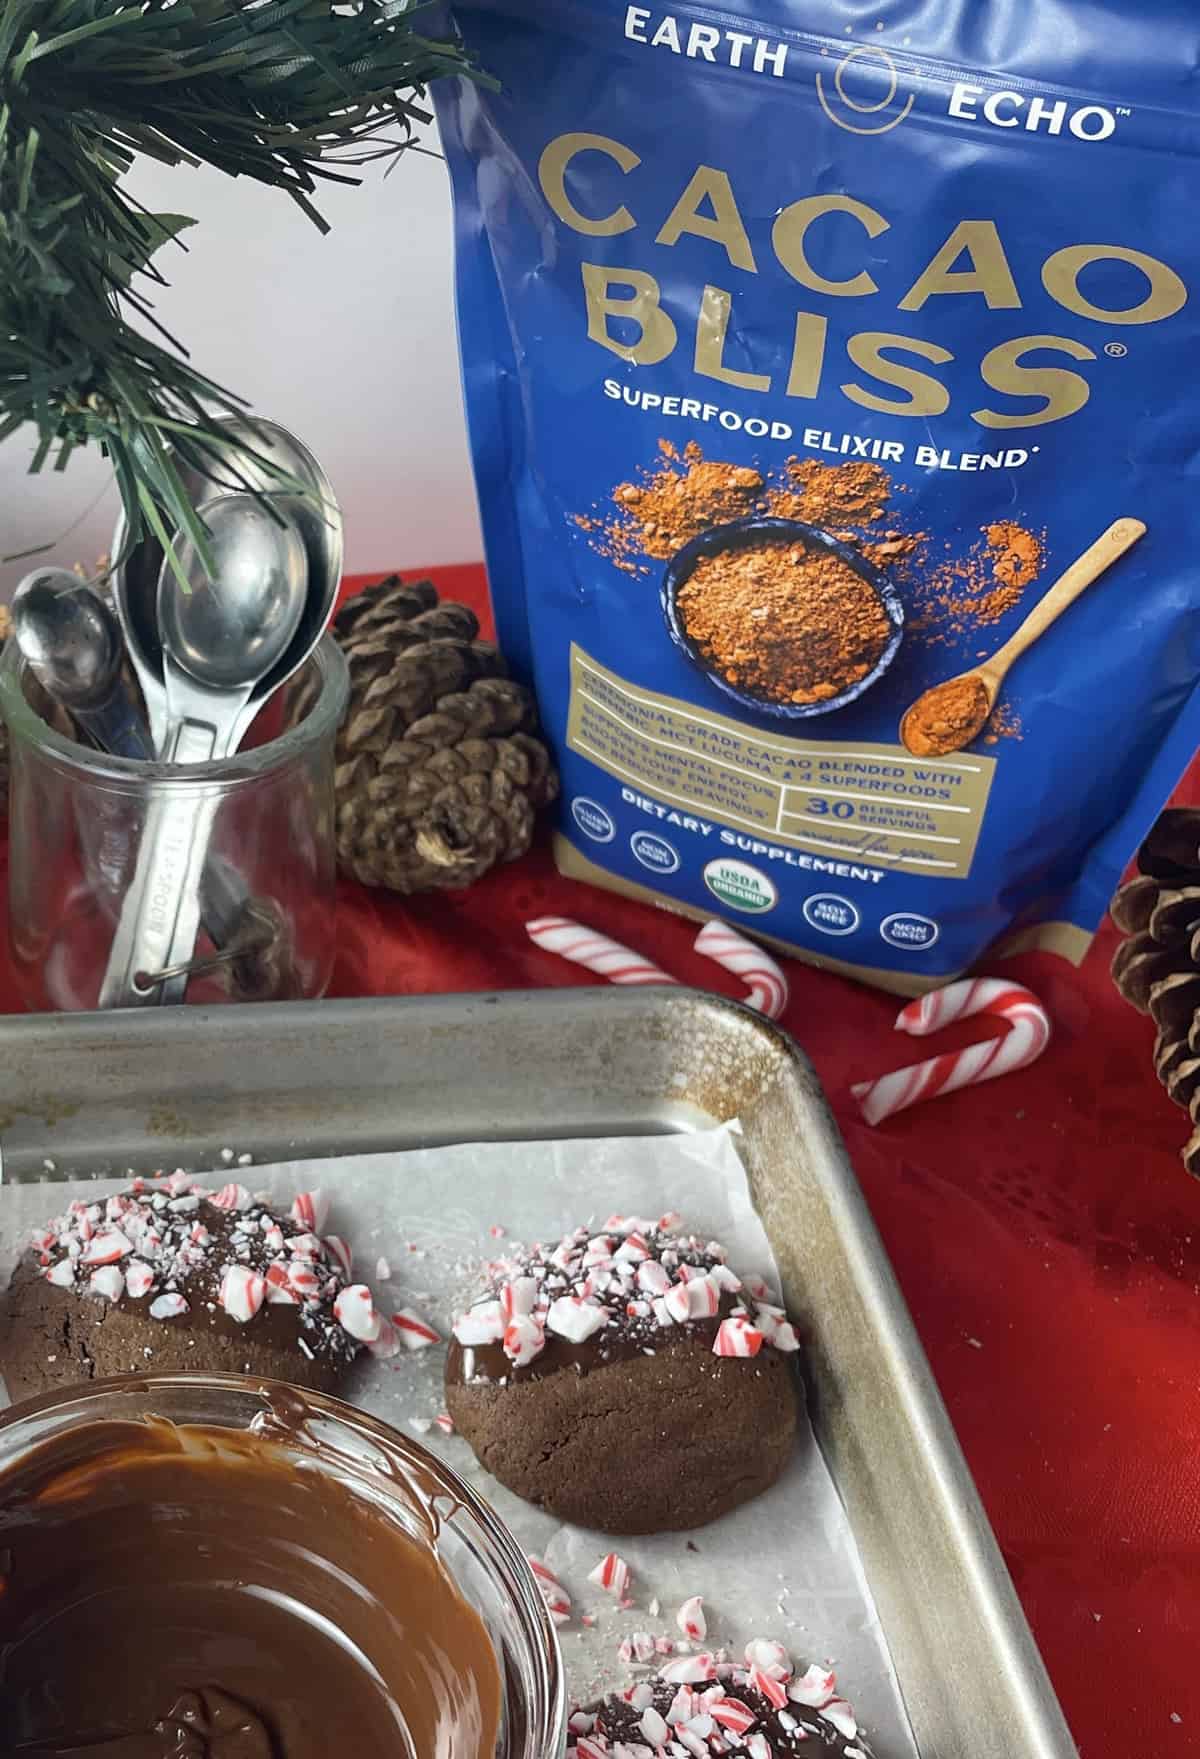 Dipped cookies on a baking sheet with bag of Cacao Bliss in the background.